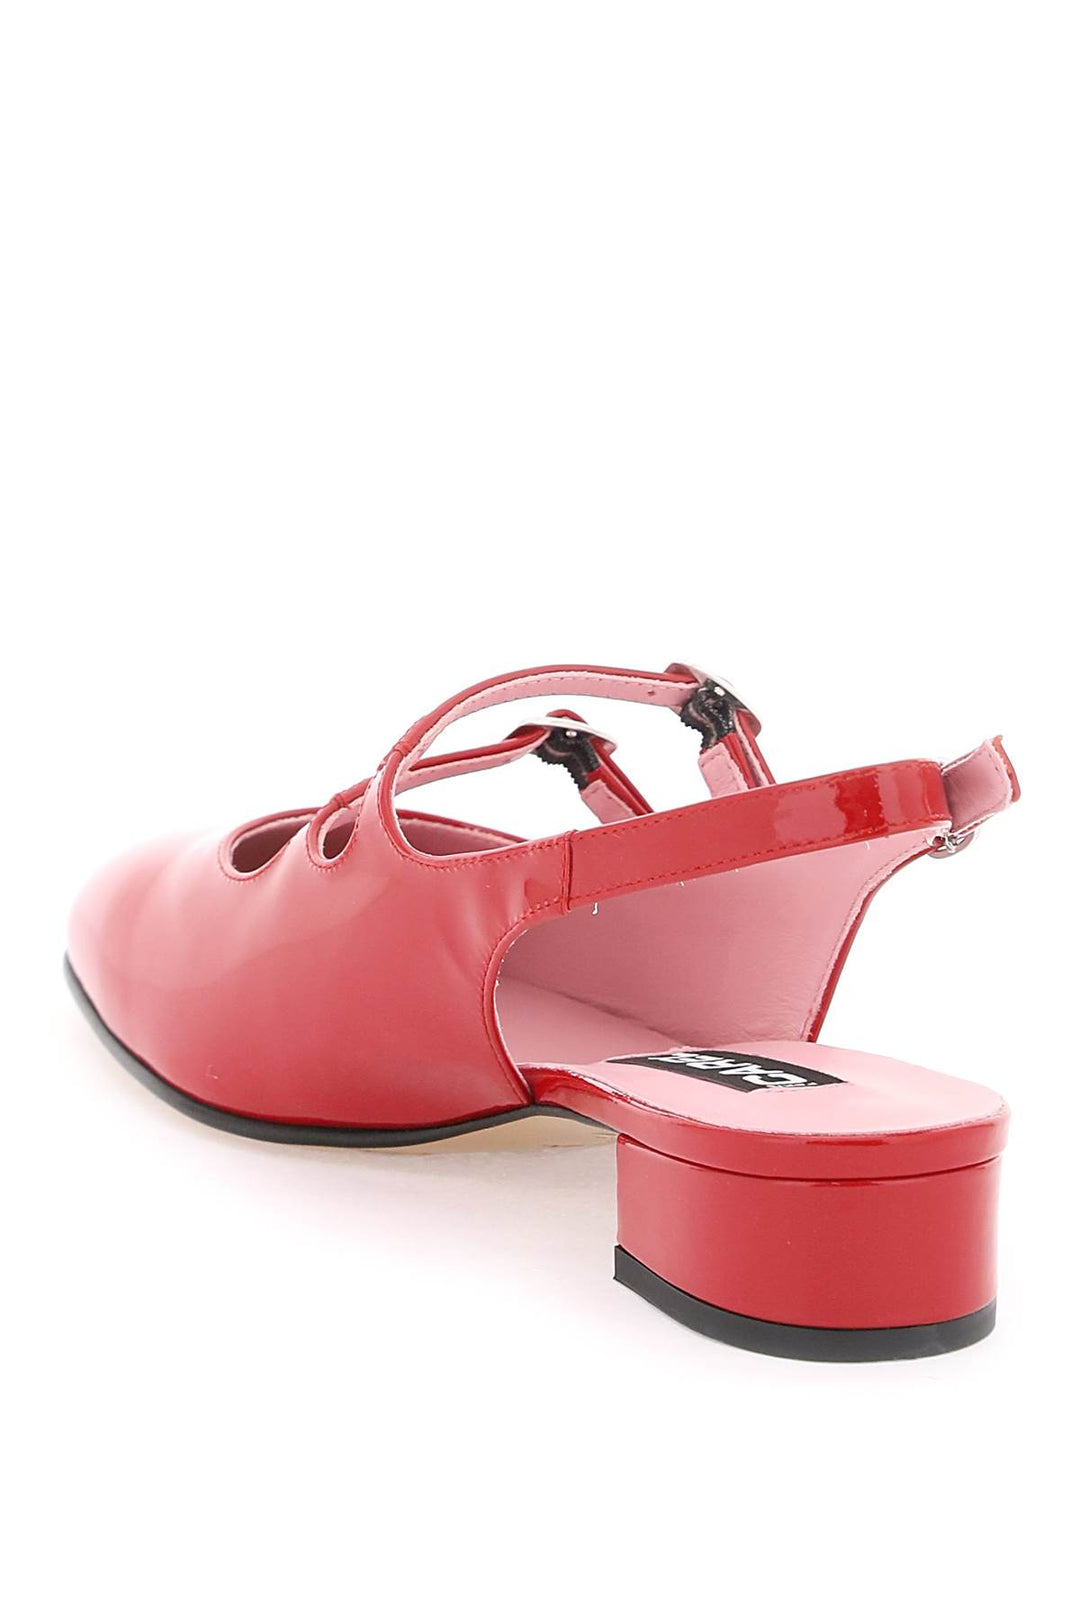 Carel Patent Leather Pêche Slingback Mary Jane   Red